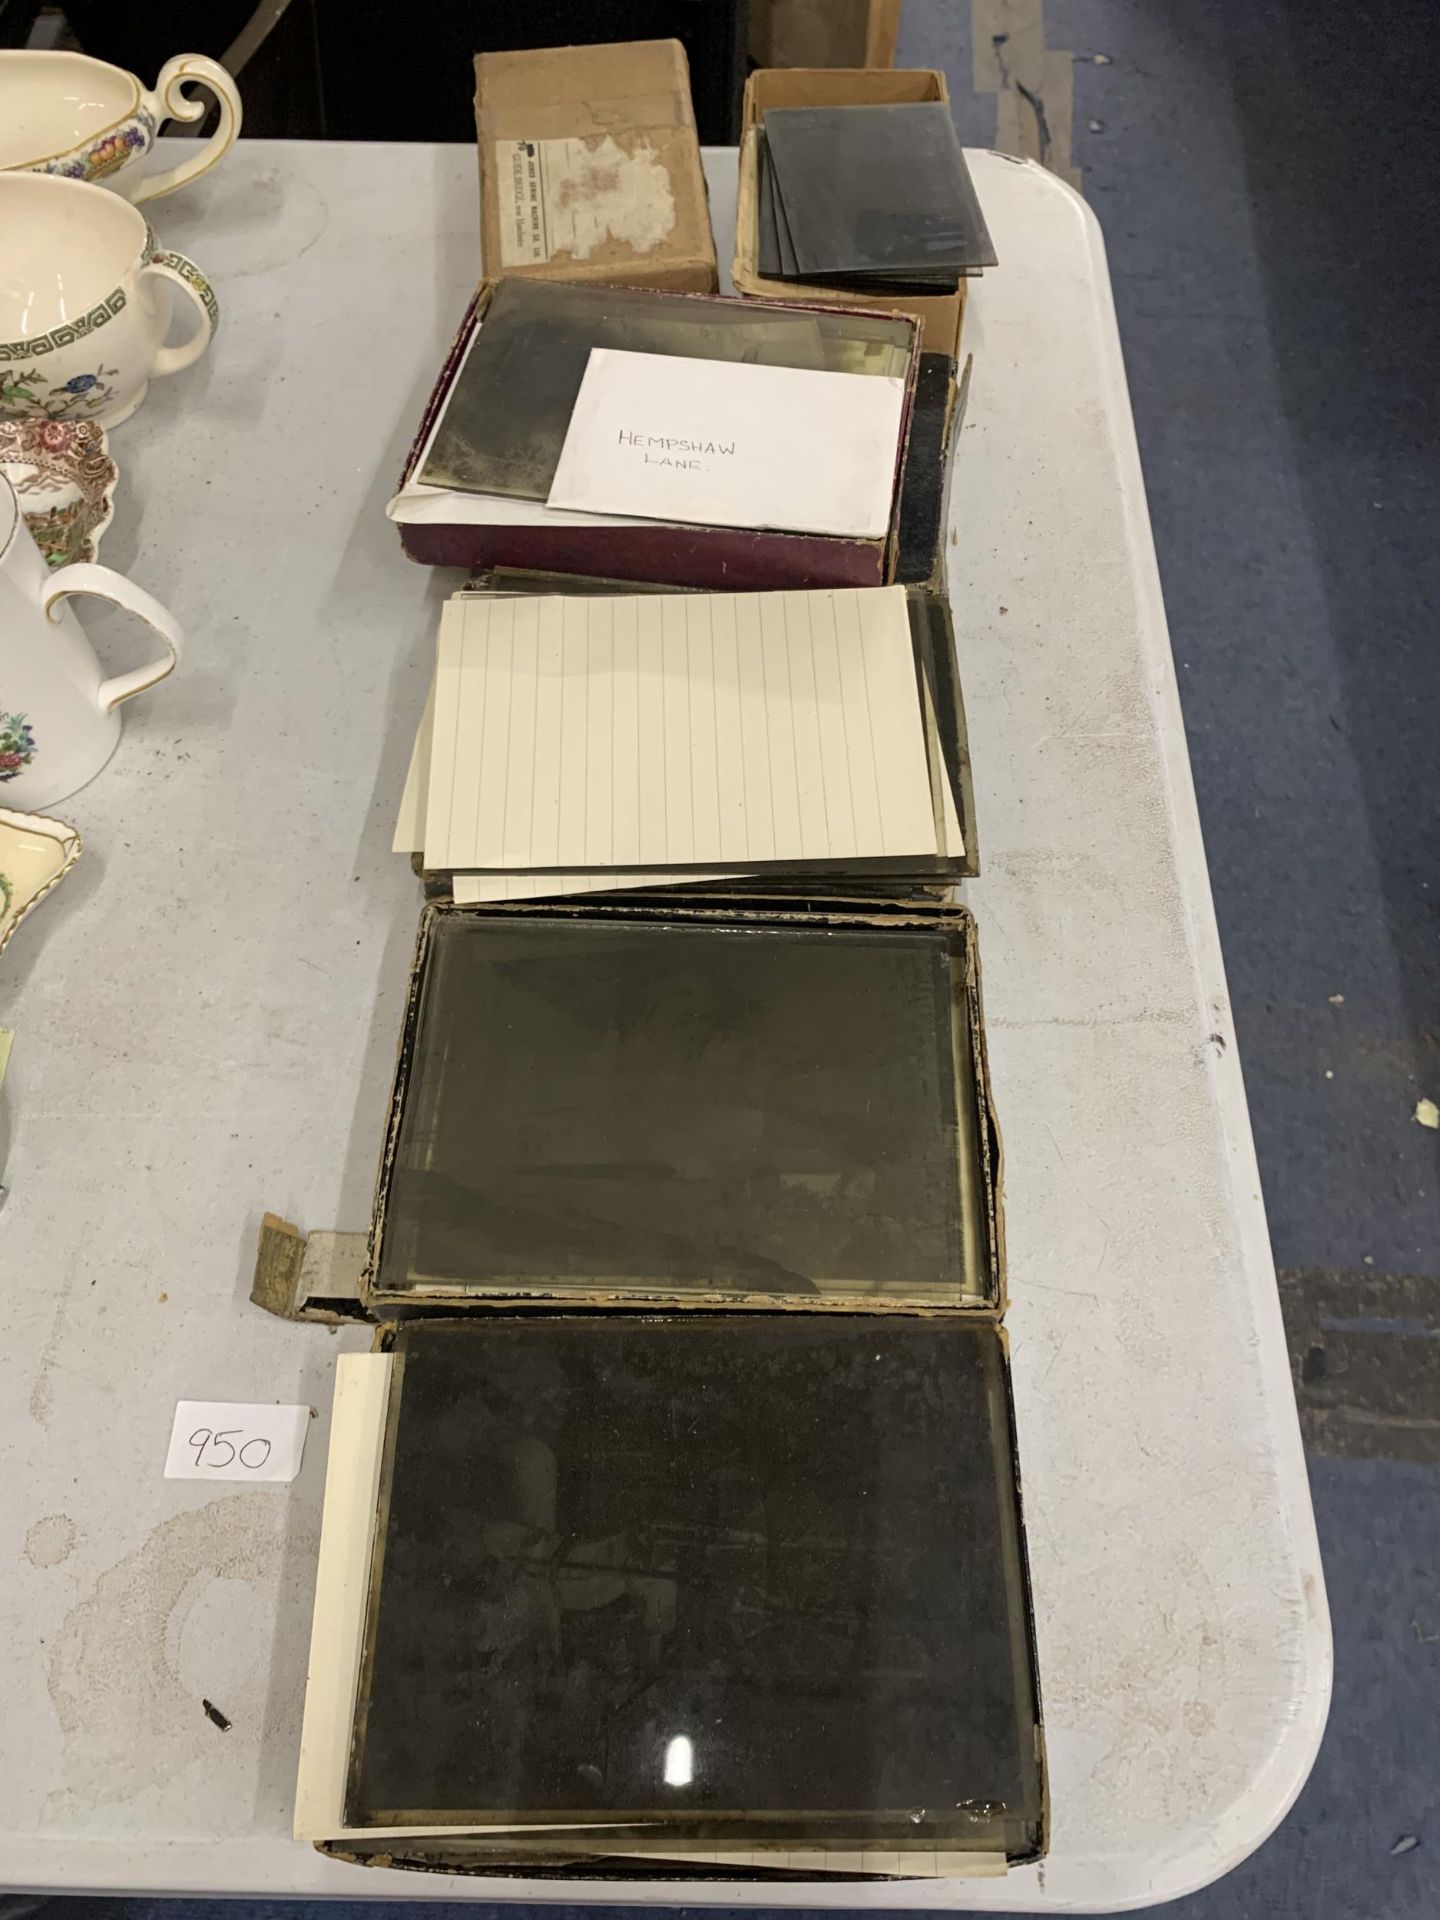 A COLLECTION OF GLASS ILFORD DRY PLATES WITH PHOTOGRAPHIC IMAGES ON THEM